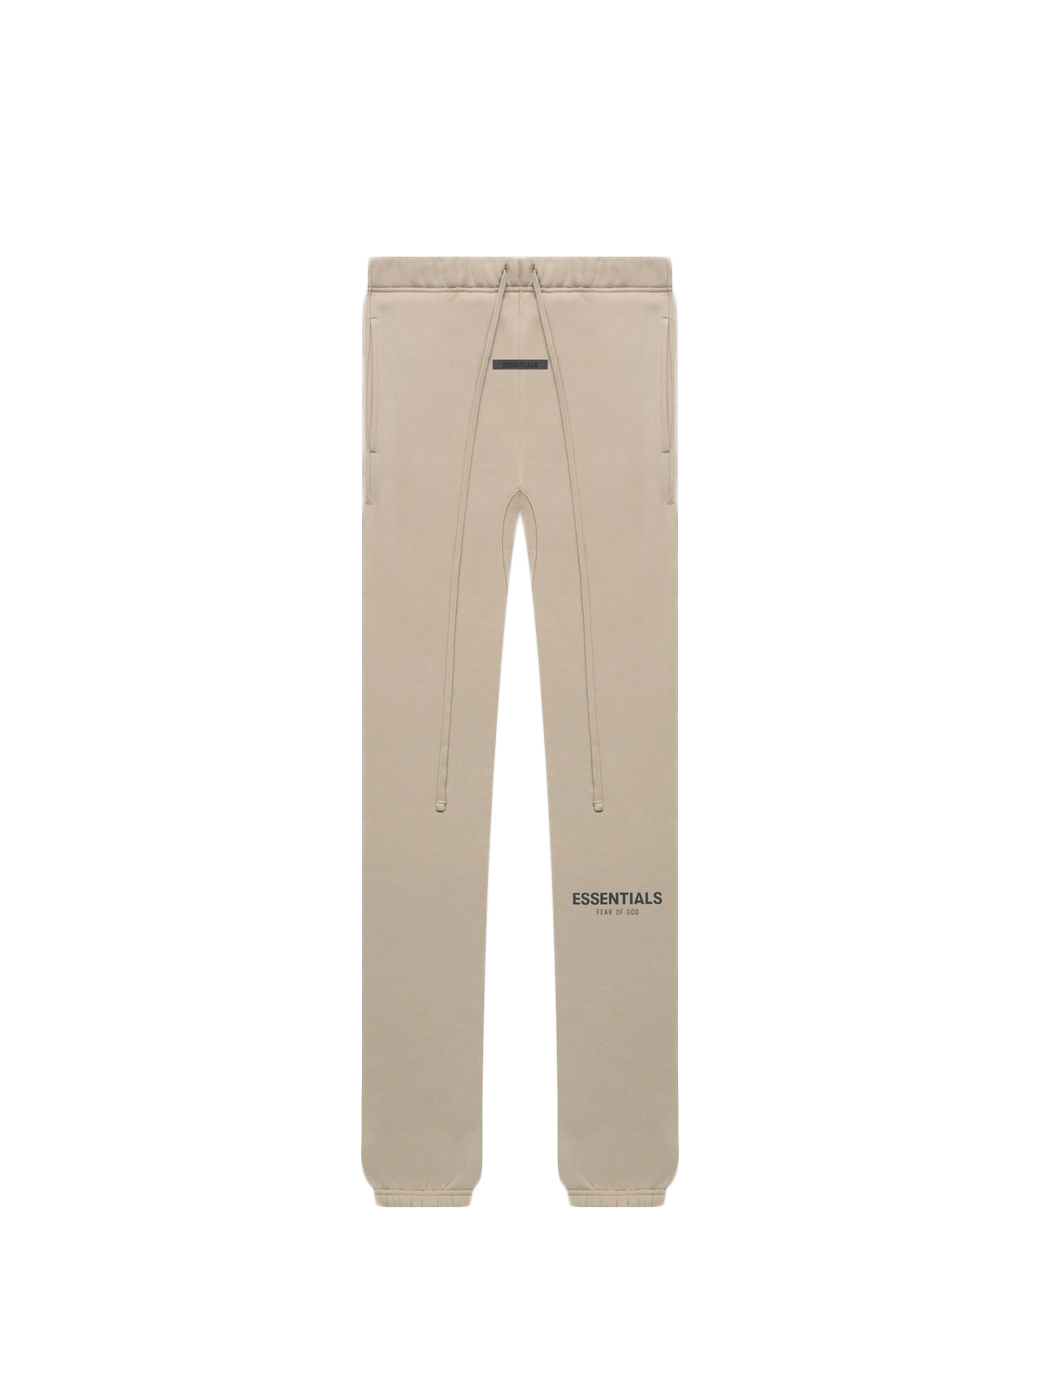 Fear of God Essentials Core Collection Sweatpant String - FW21 